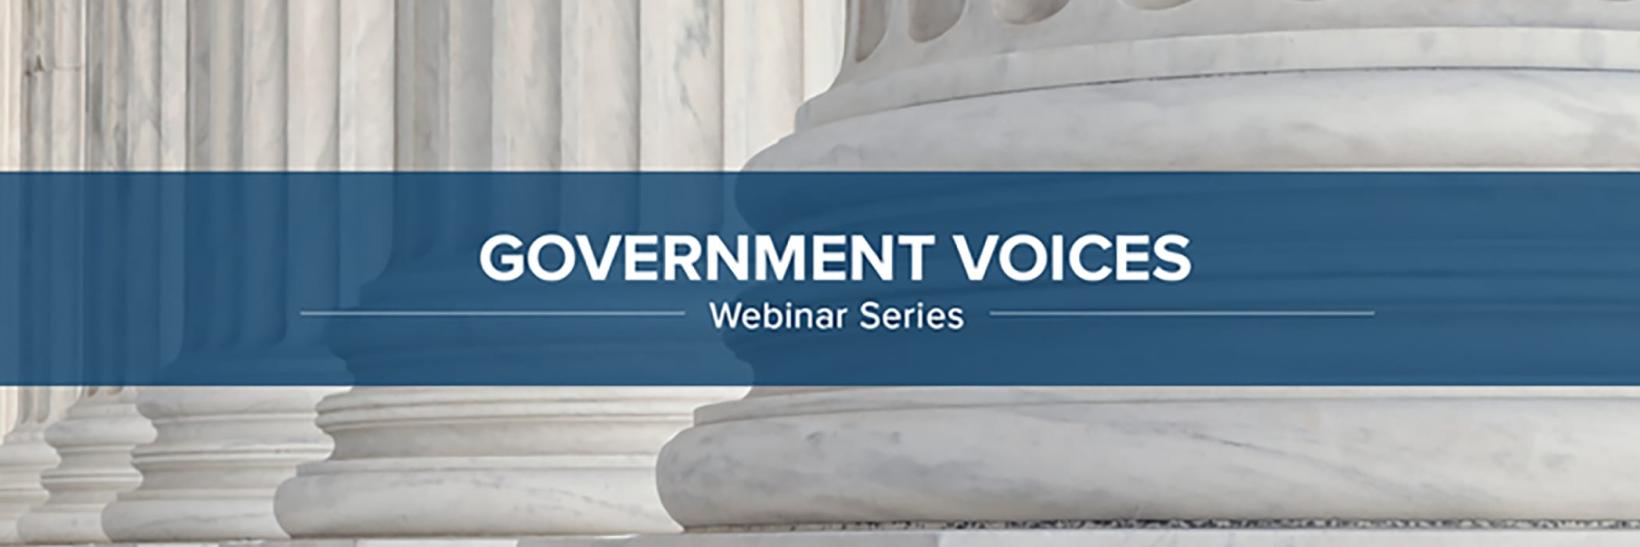 Government Voices Webinar Series